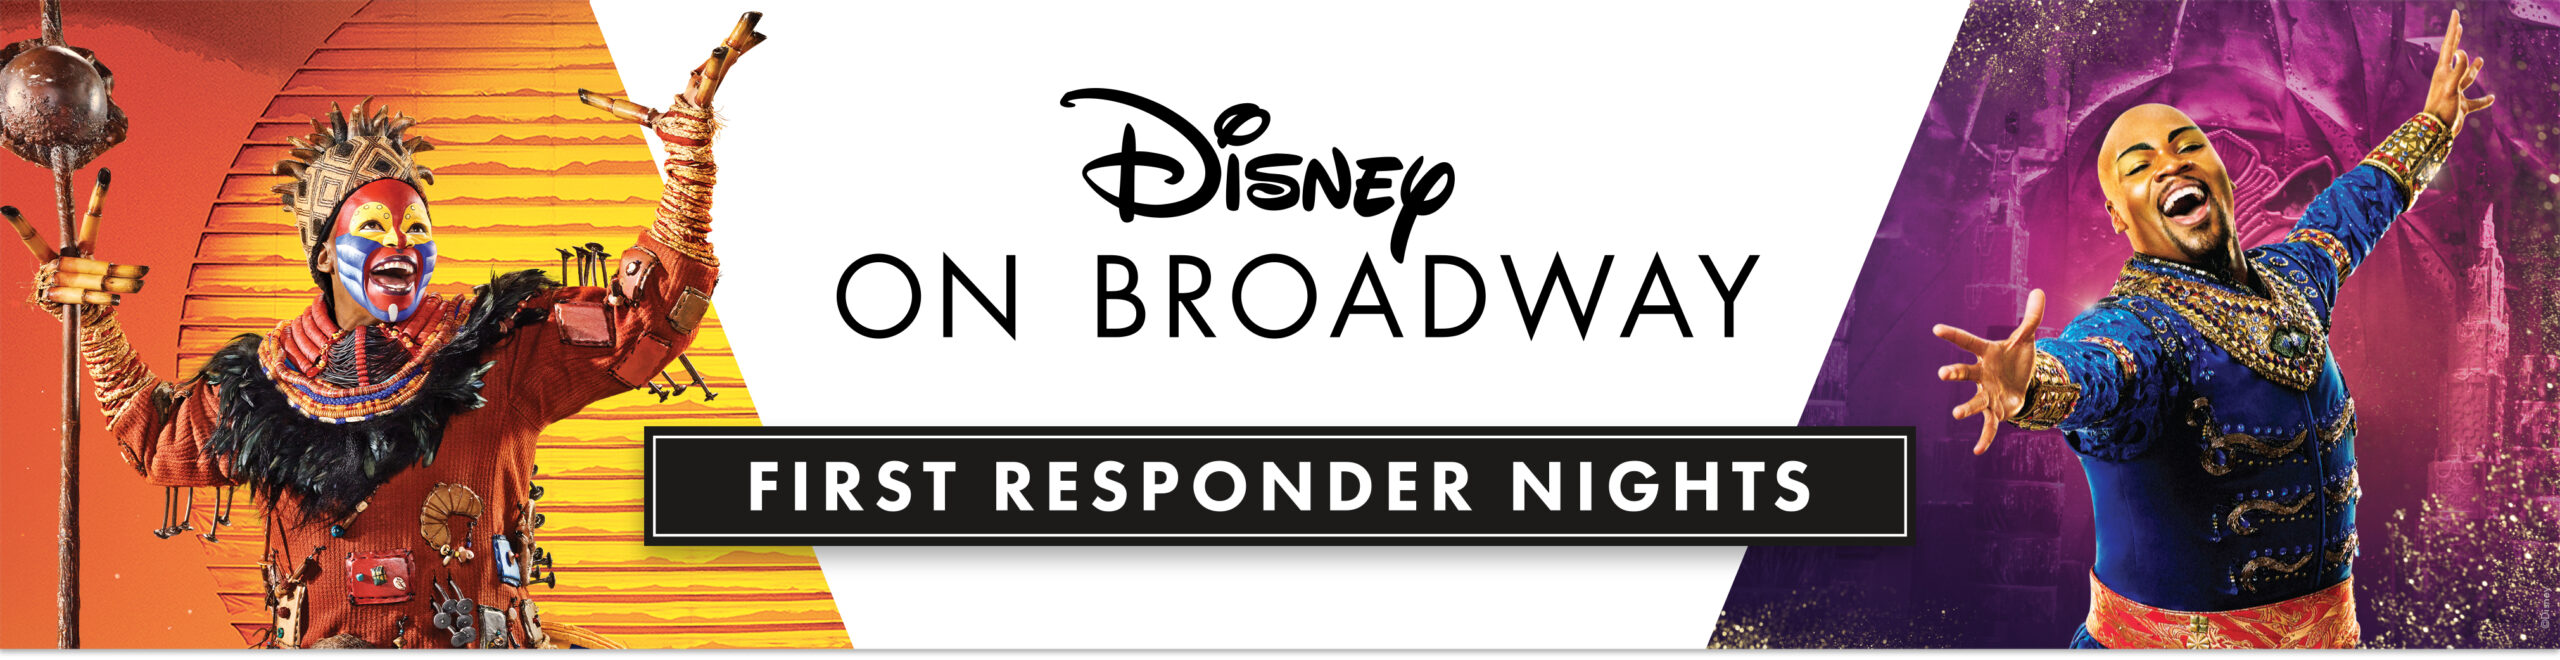 First Responder Nights with Disney on Broadway